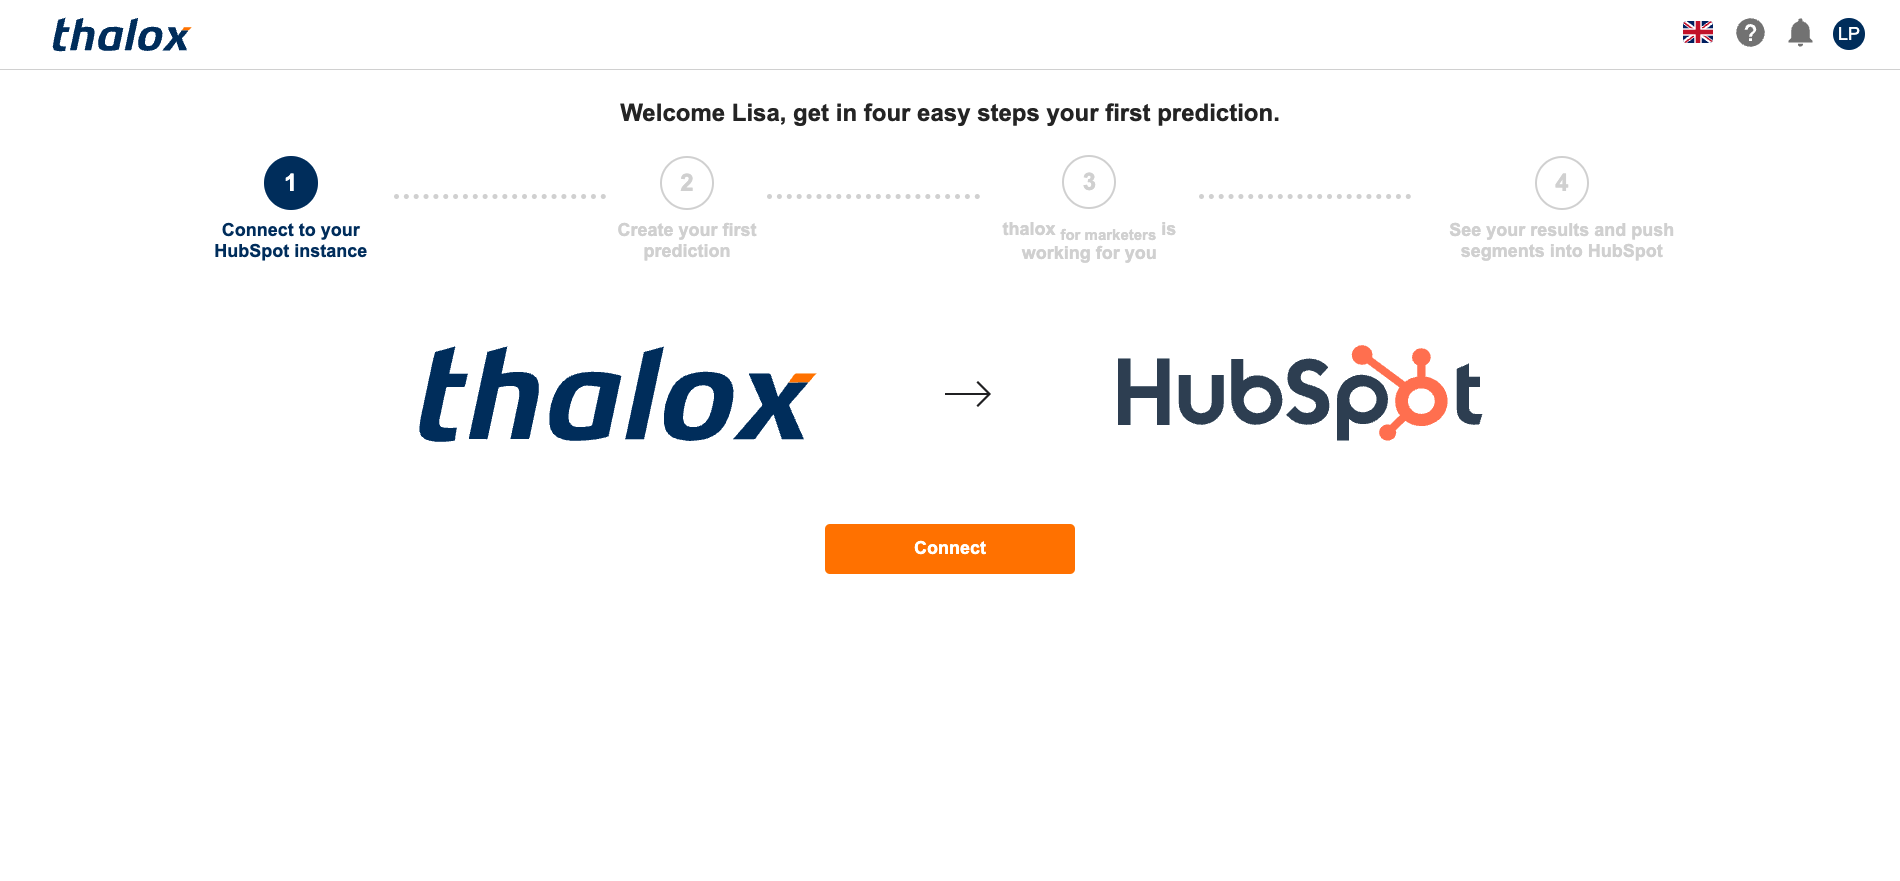 Thalox Software - Step 1: Connect to HubSpot